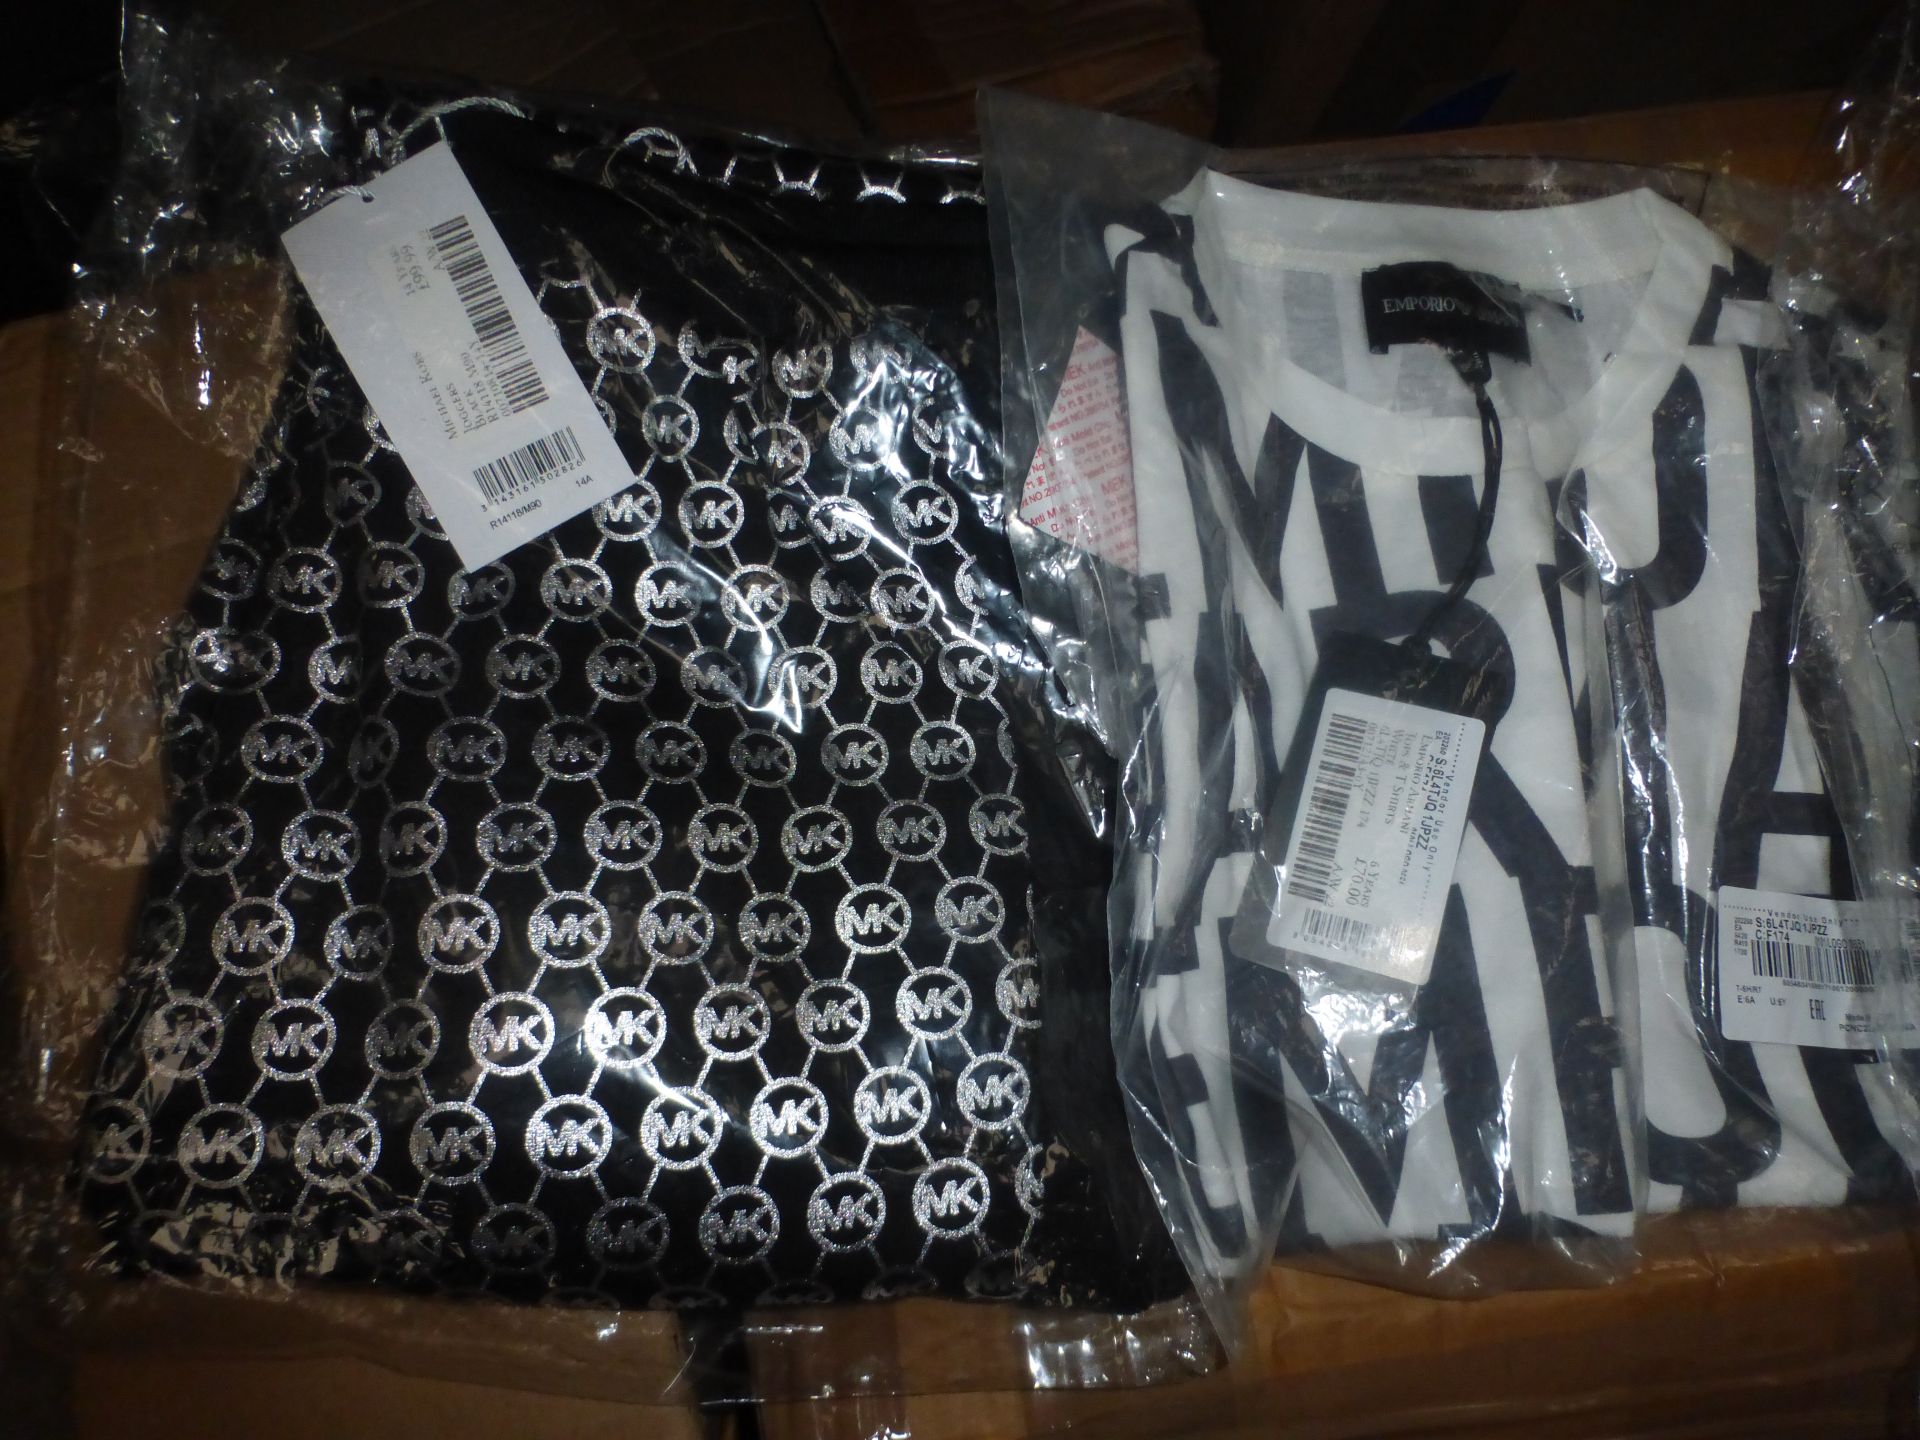 3 x items of children's clothing, comprising 1 x Michael Kors logo'd joggers, size 14yrs, 1 x pair